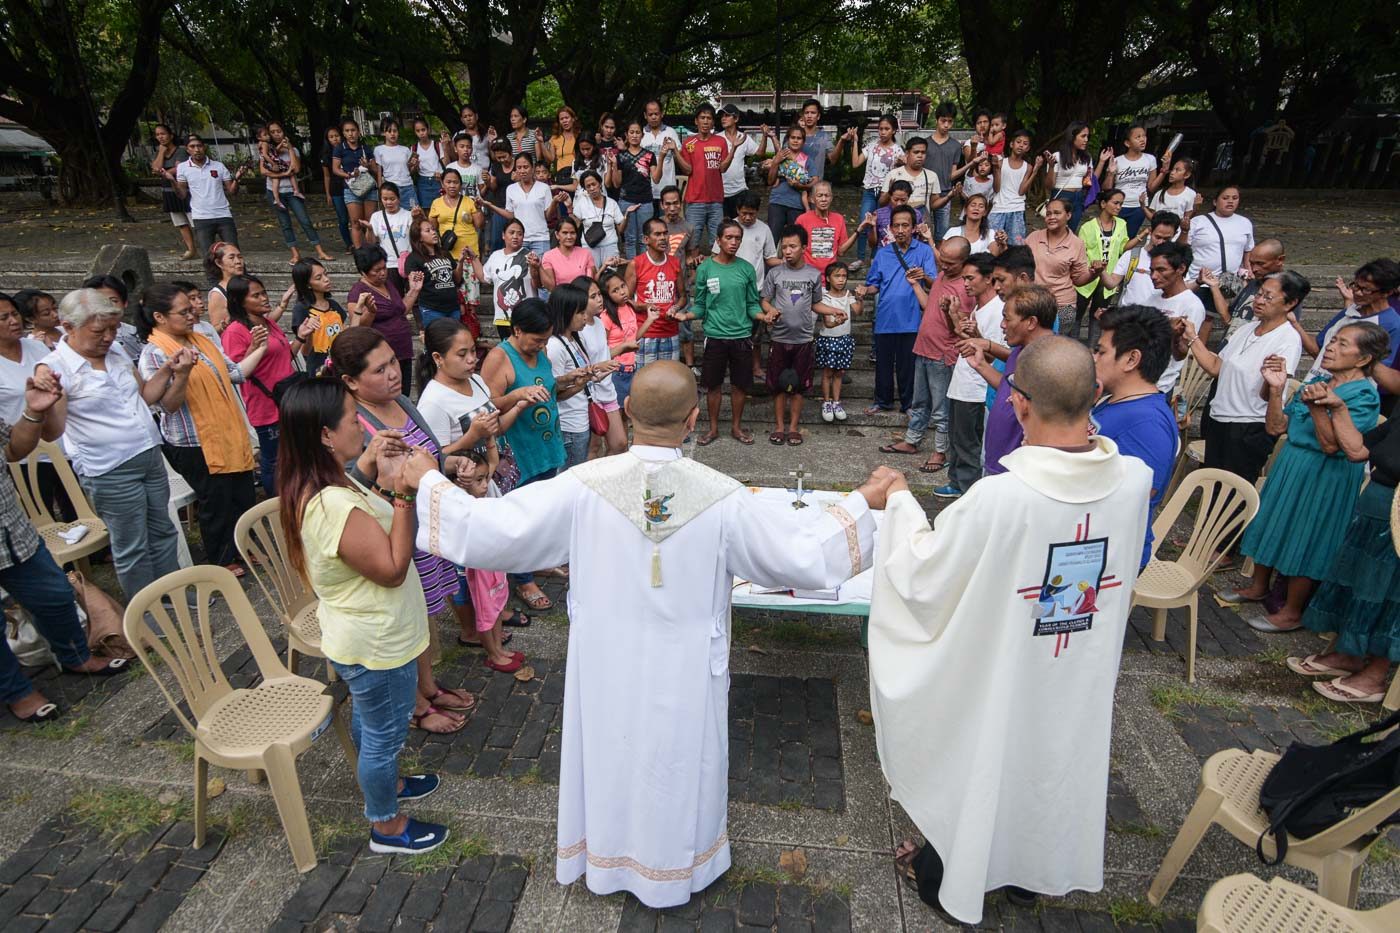 HOLY MASS. Around a hundred individuals from different urban poor communities around Metro Manila celebrate Mass, and observe the Washing of the Feet, at the Bantayog ng Mga Bayani.